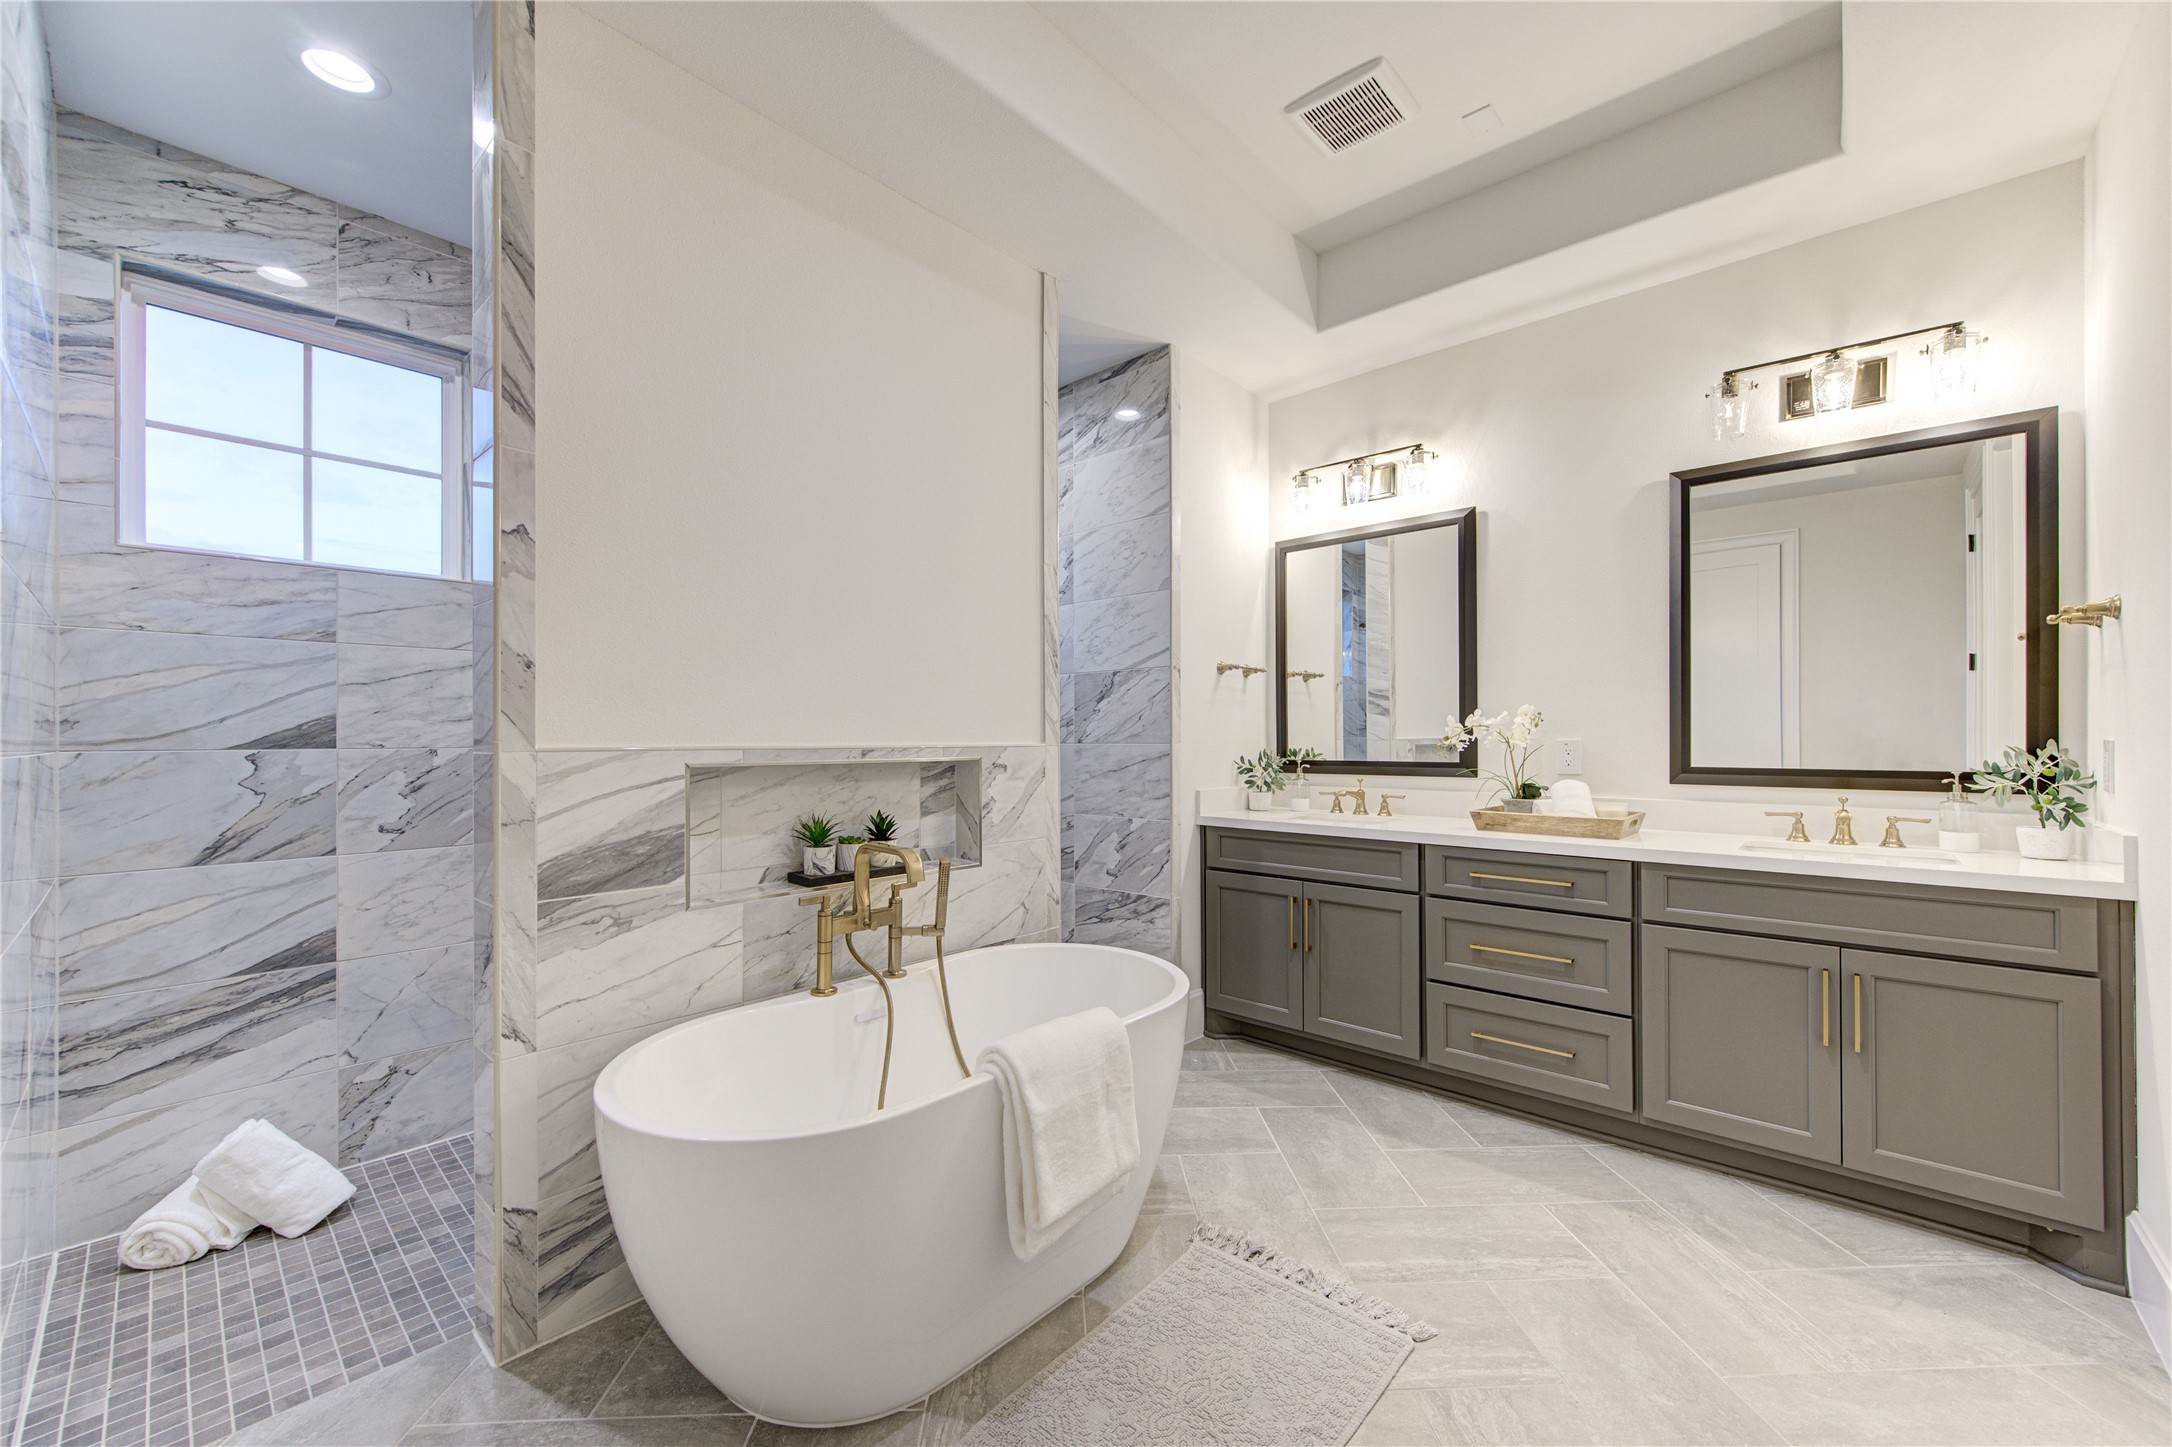 he spa-like ensuite bathroom boasts a dual-entry walk-in shower and a free-standing tub with gorgeous marble detailing.